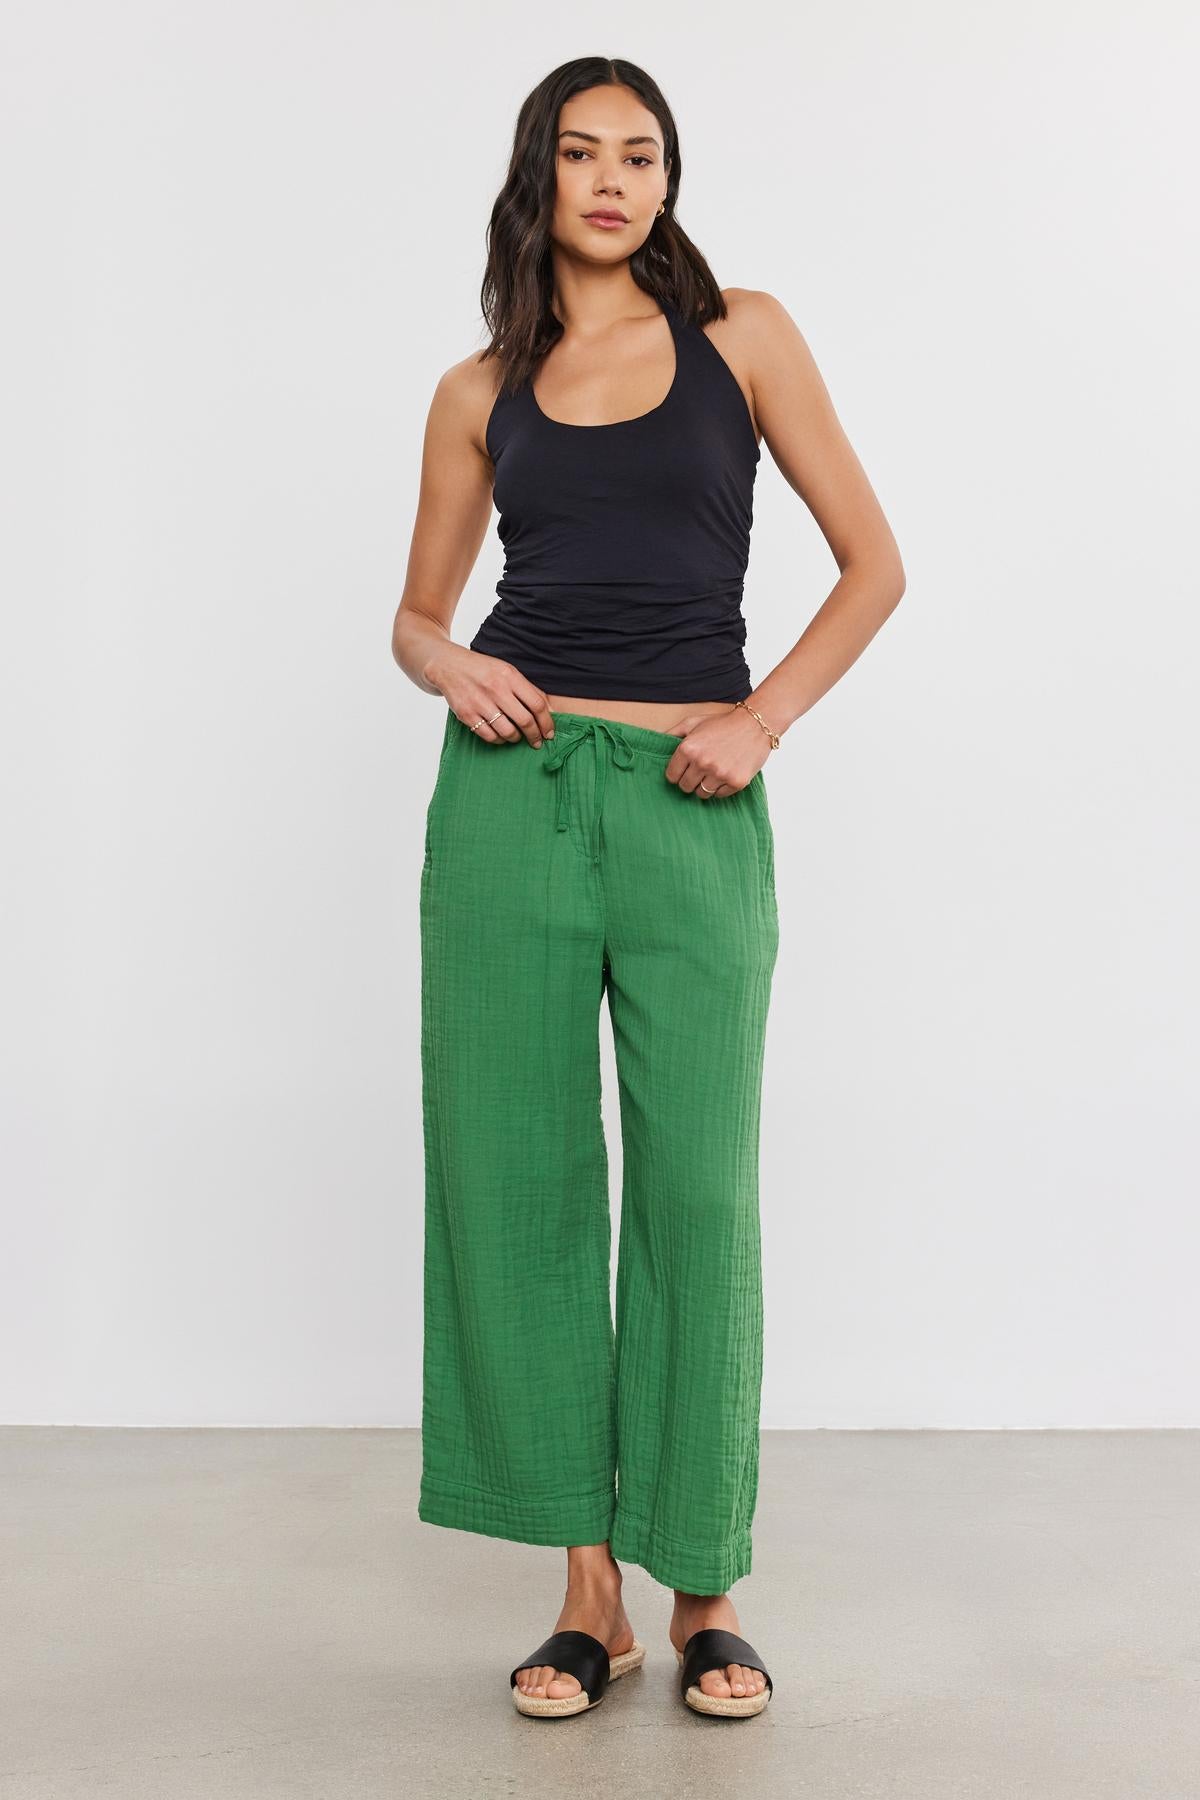 A woman stands confidently, wearing black tank top and Velvet by Graham & Spencer FRANNY COTTON GAUZE PANTS with relaxed legs and slash pockets, paired with black sandals. She's posing in a plain studio setting.-36917078294721